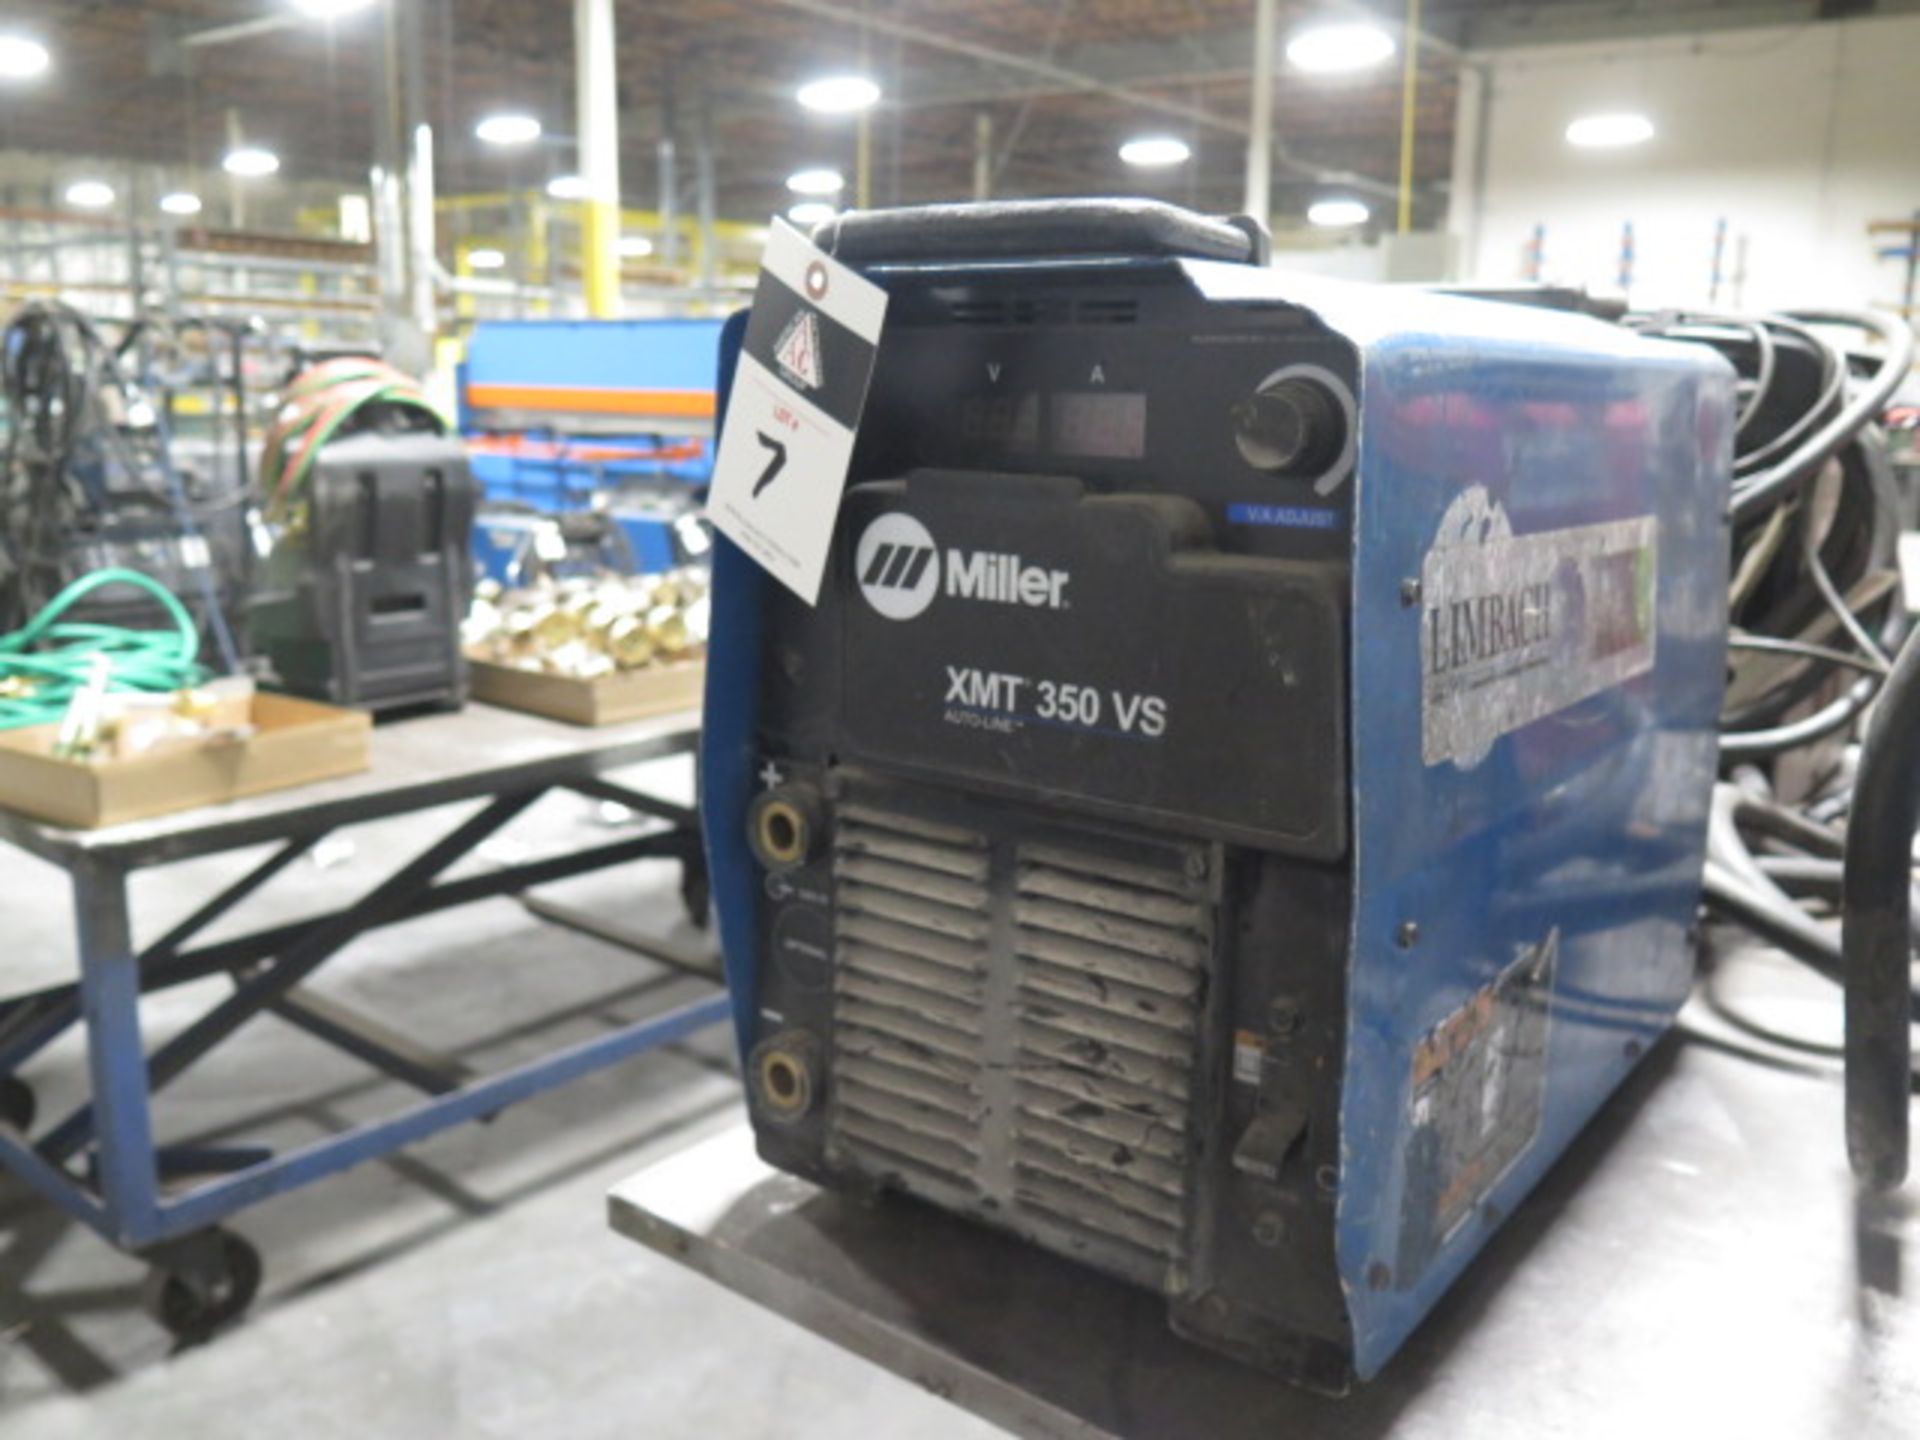 Miller XMT 350 VS Auto-Line Arc welding Power Source s/n MG024114U (SOLD AS-IS - NO WARRANTY) - Image 2 of 5